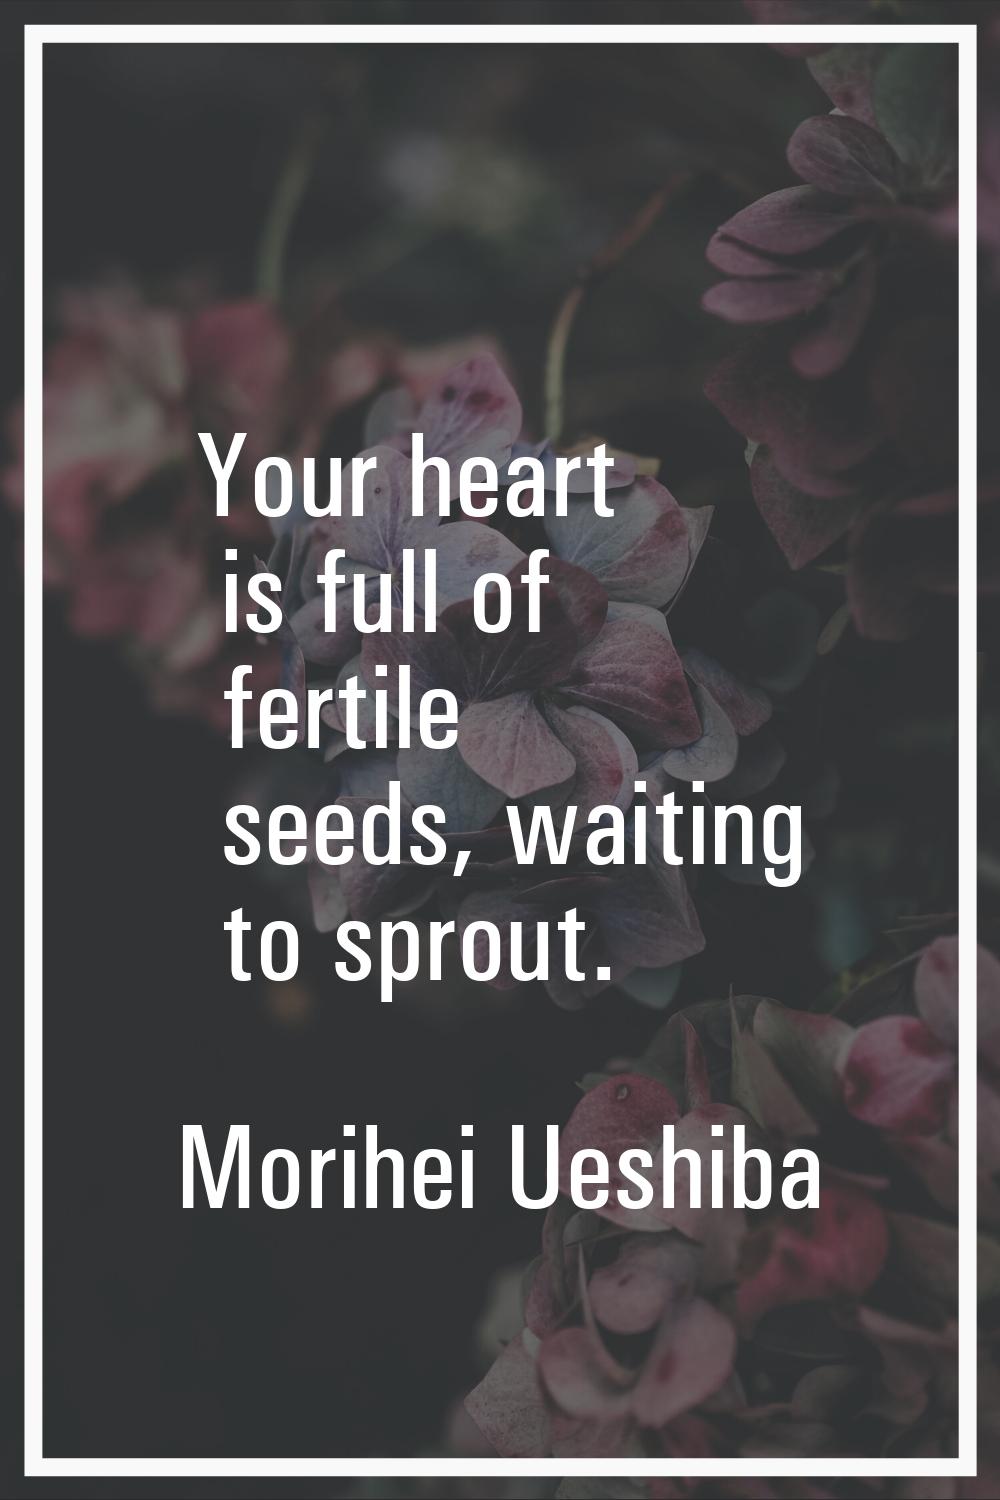 Your heart is full of fertile seeds, waiting to sprout.